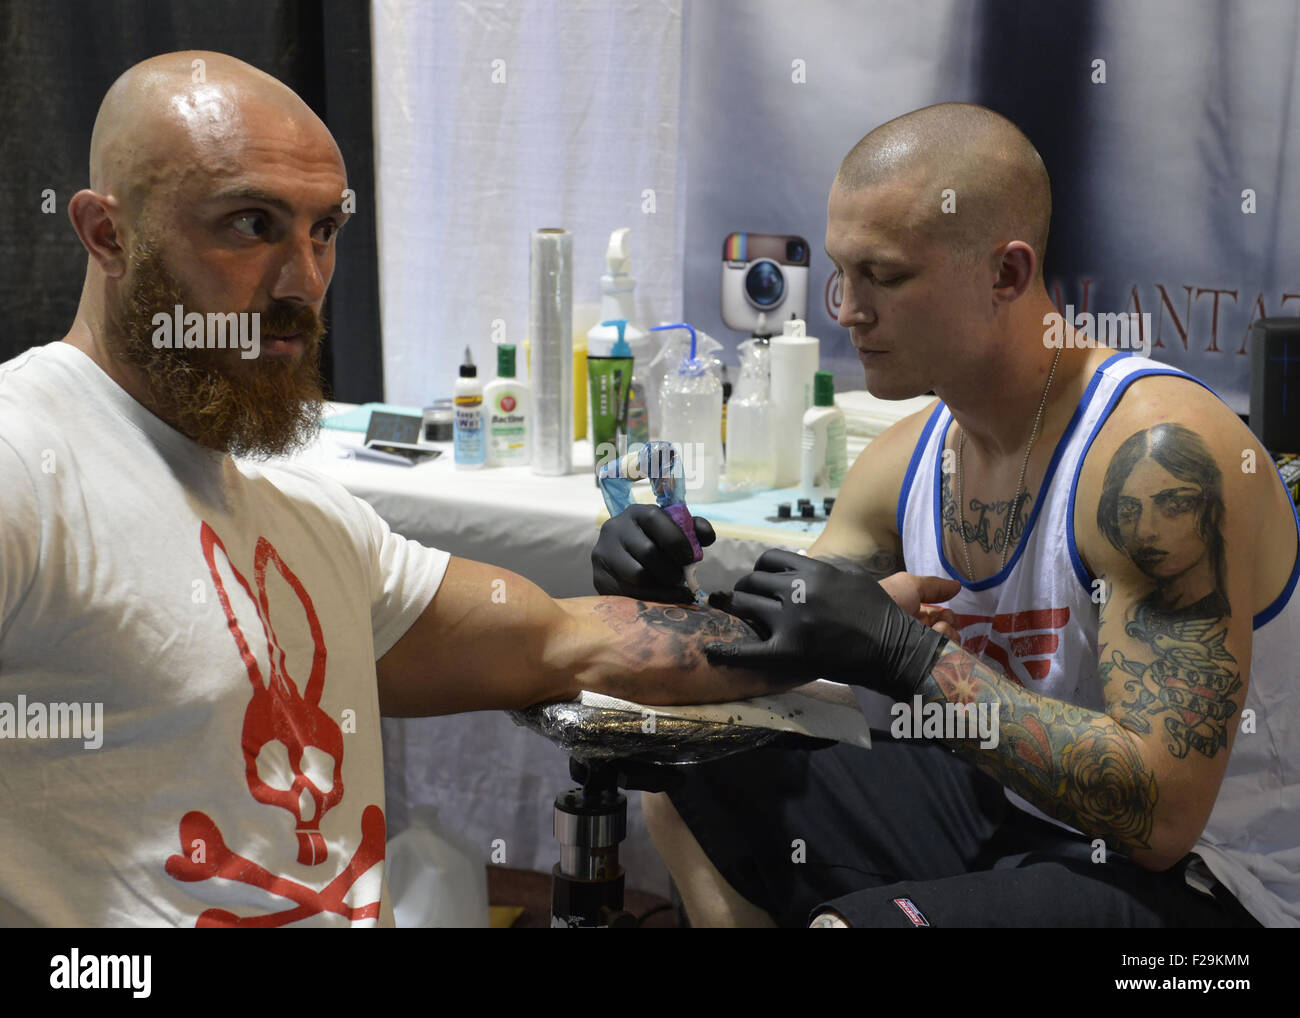 Garden City, New York, USA. 13th Sep, 2015. LUKE PALAN, a tattoo artist from Vegas, is tattooing a man's arm at the United Ink Flight 915 Tattoo convention at the Cradle of Aviation Museum in Long Island. The bearded man is wearing a Psycho Bunny white and red T-shirt. © Ann Parry/ZUMA Wire/Alamy Live News Stock Photo